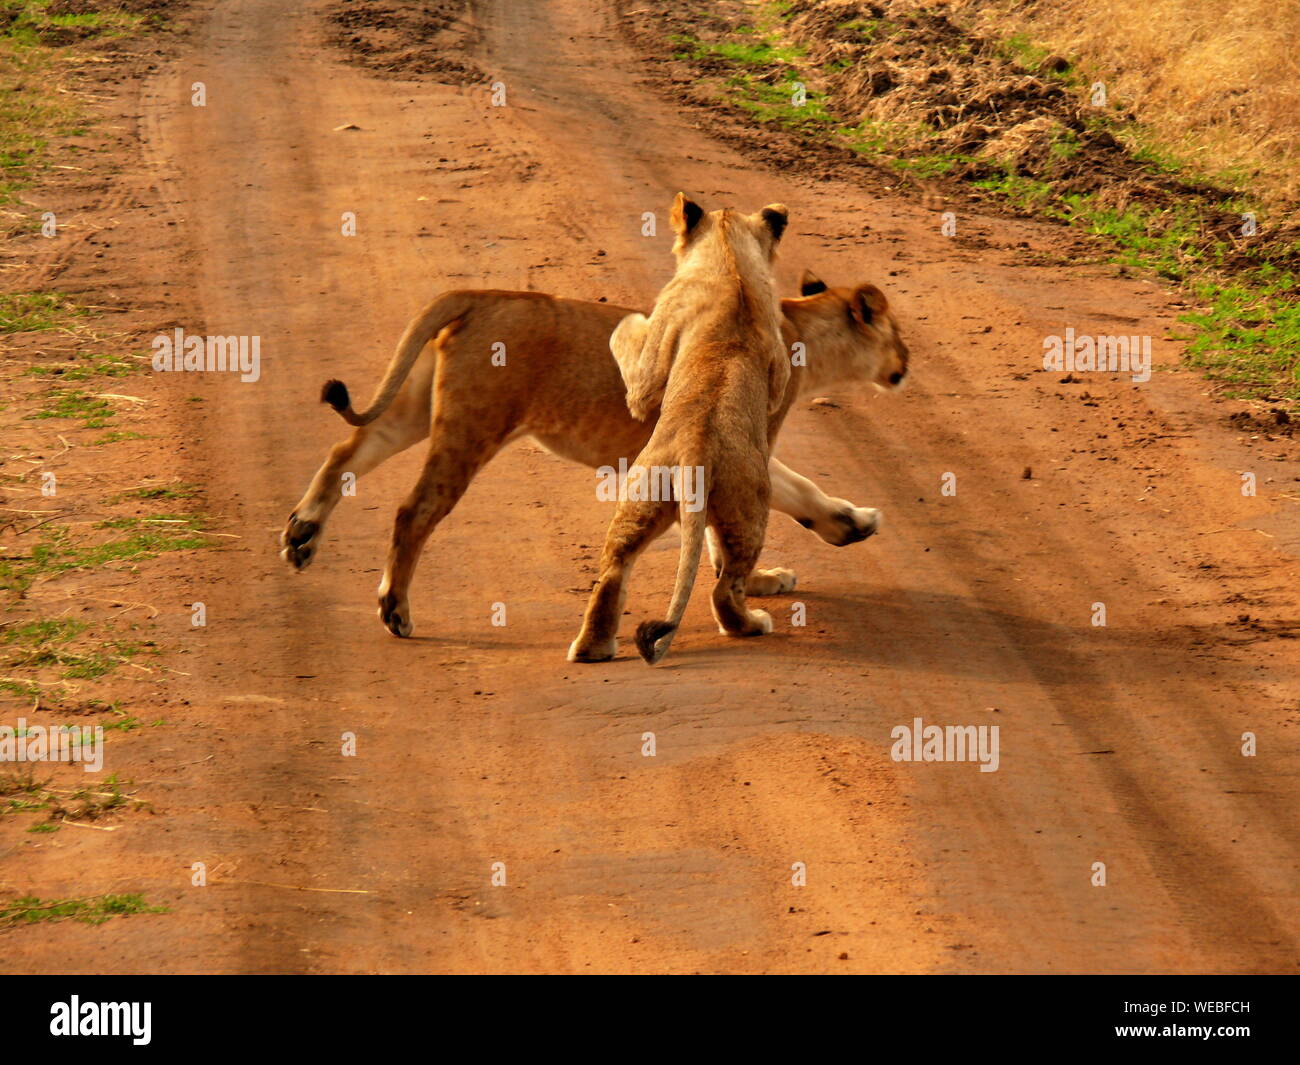 Two Young Lions Playing Around Dirt Road Stock Photo